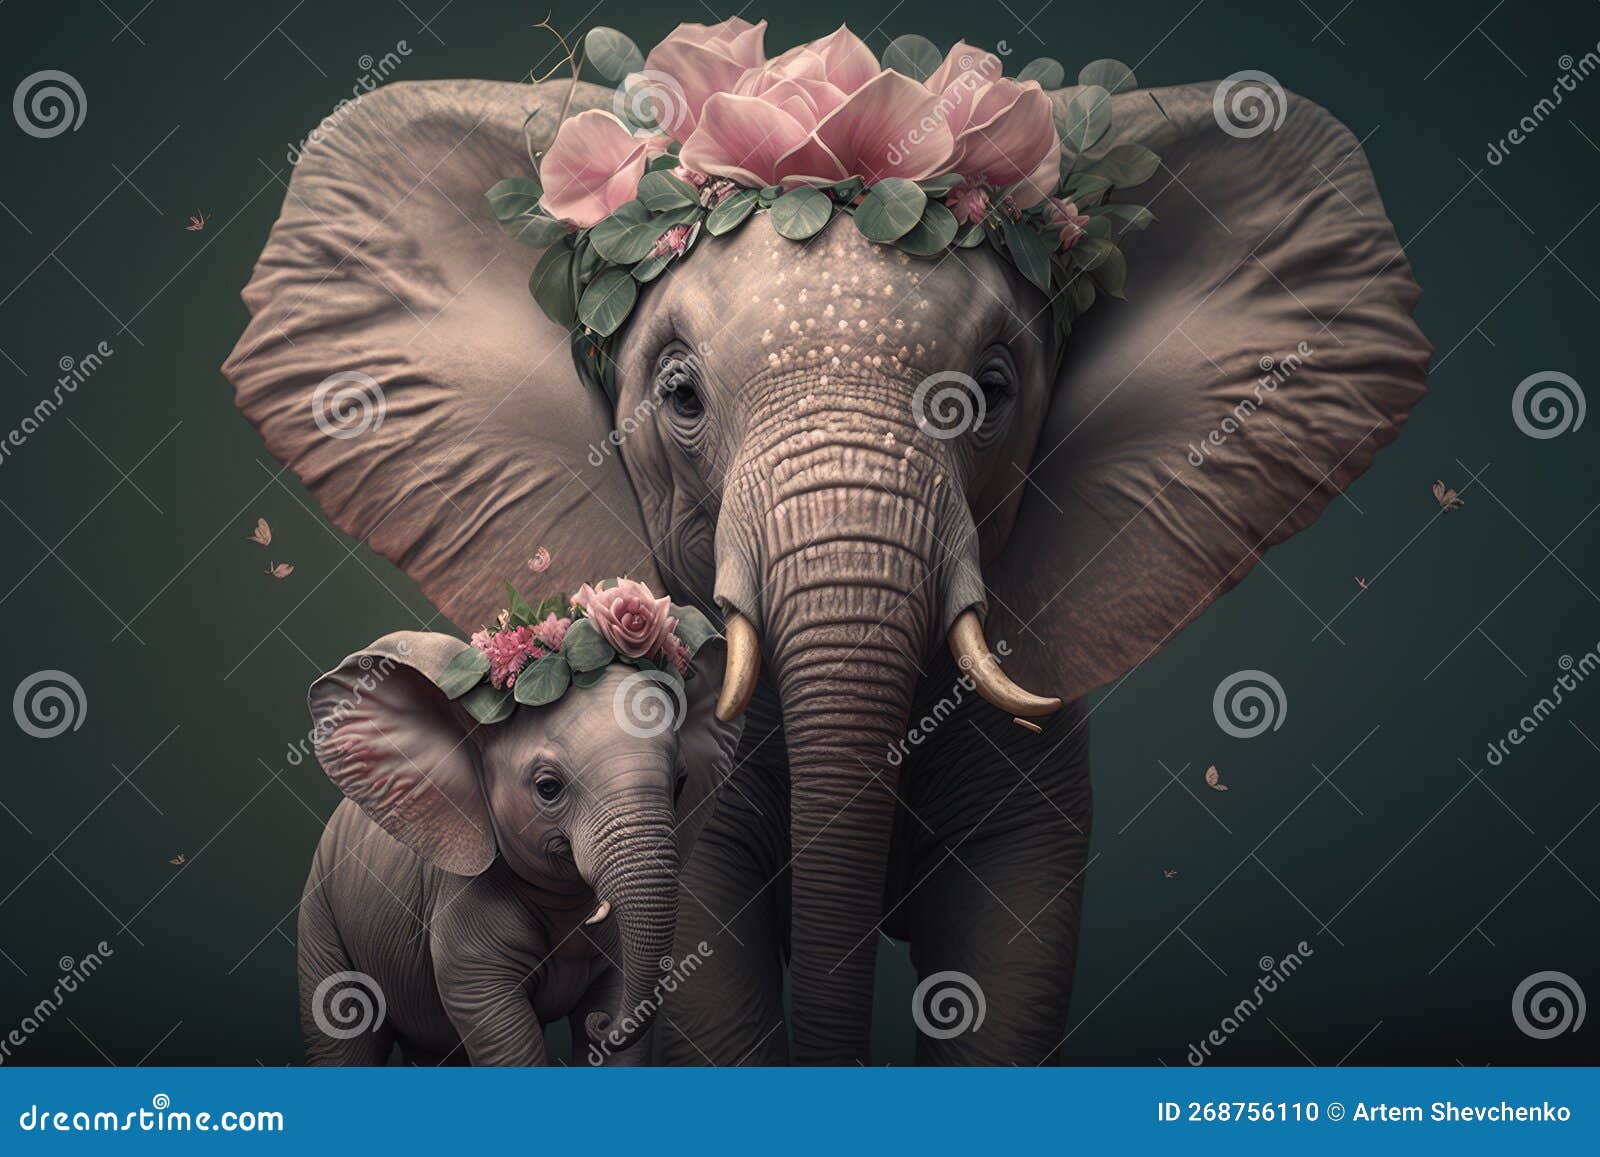 baby elephant and mother wallpaper